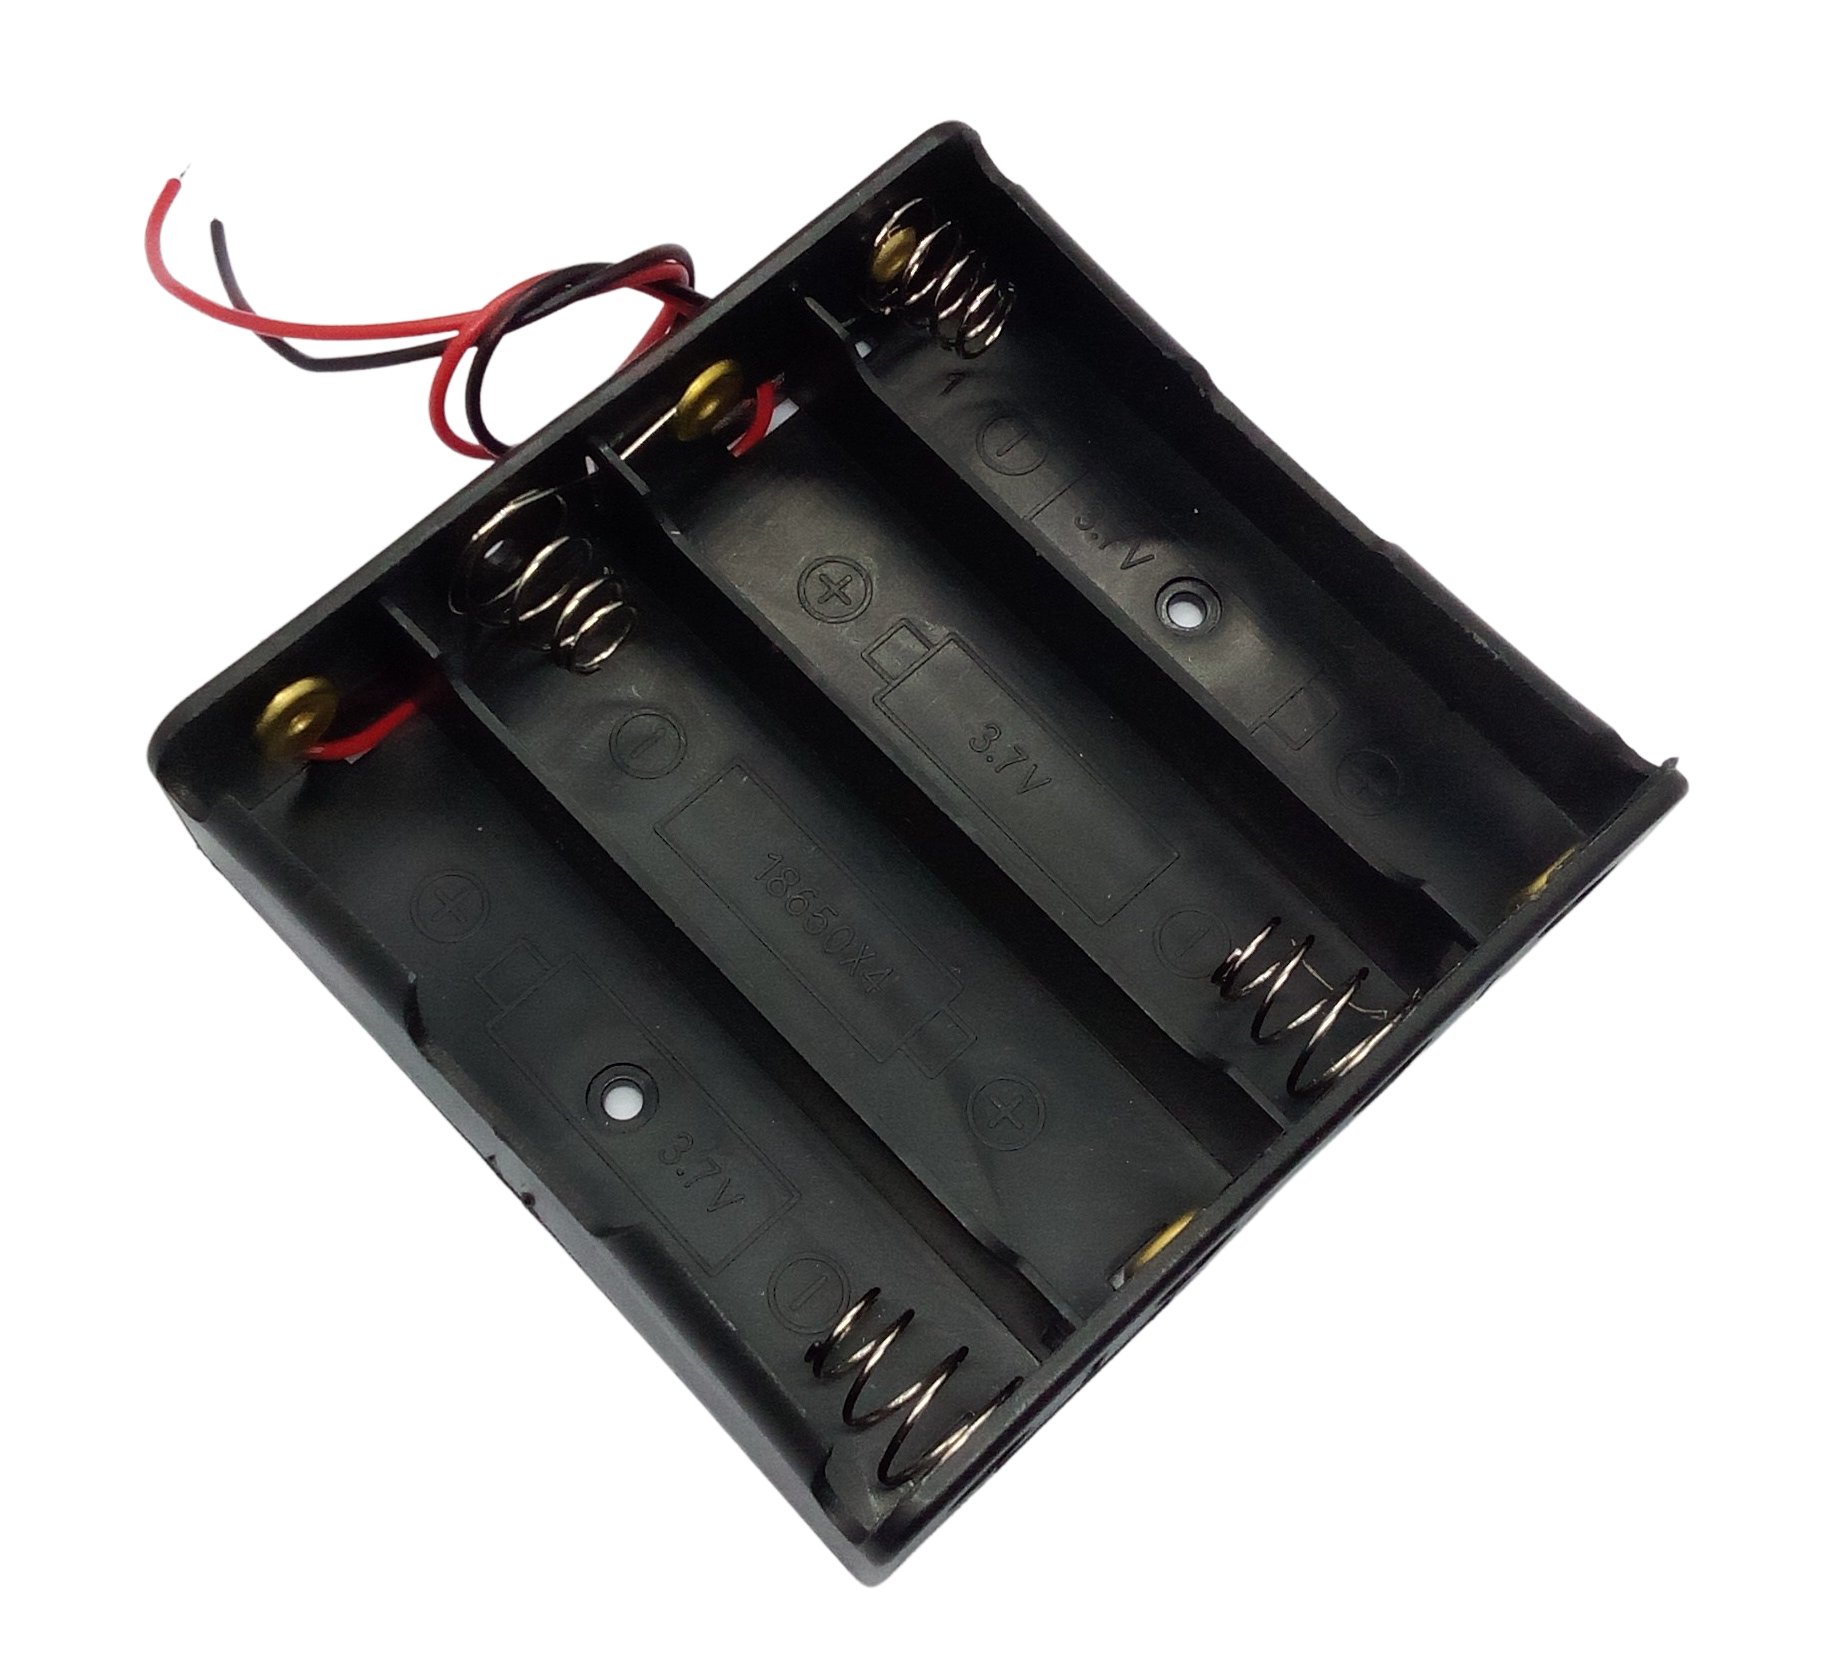 18650 battery Holder - 4 cell - eComponentZ